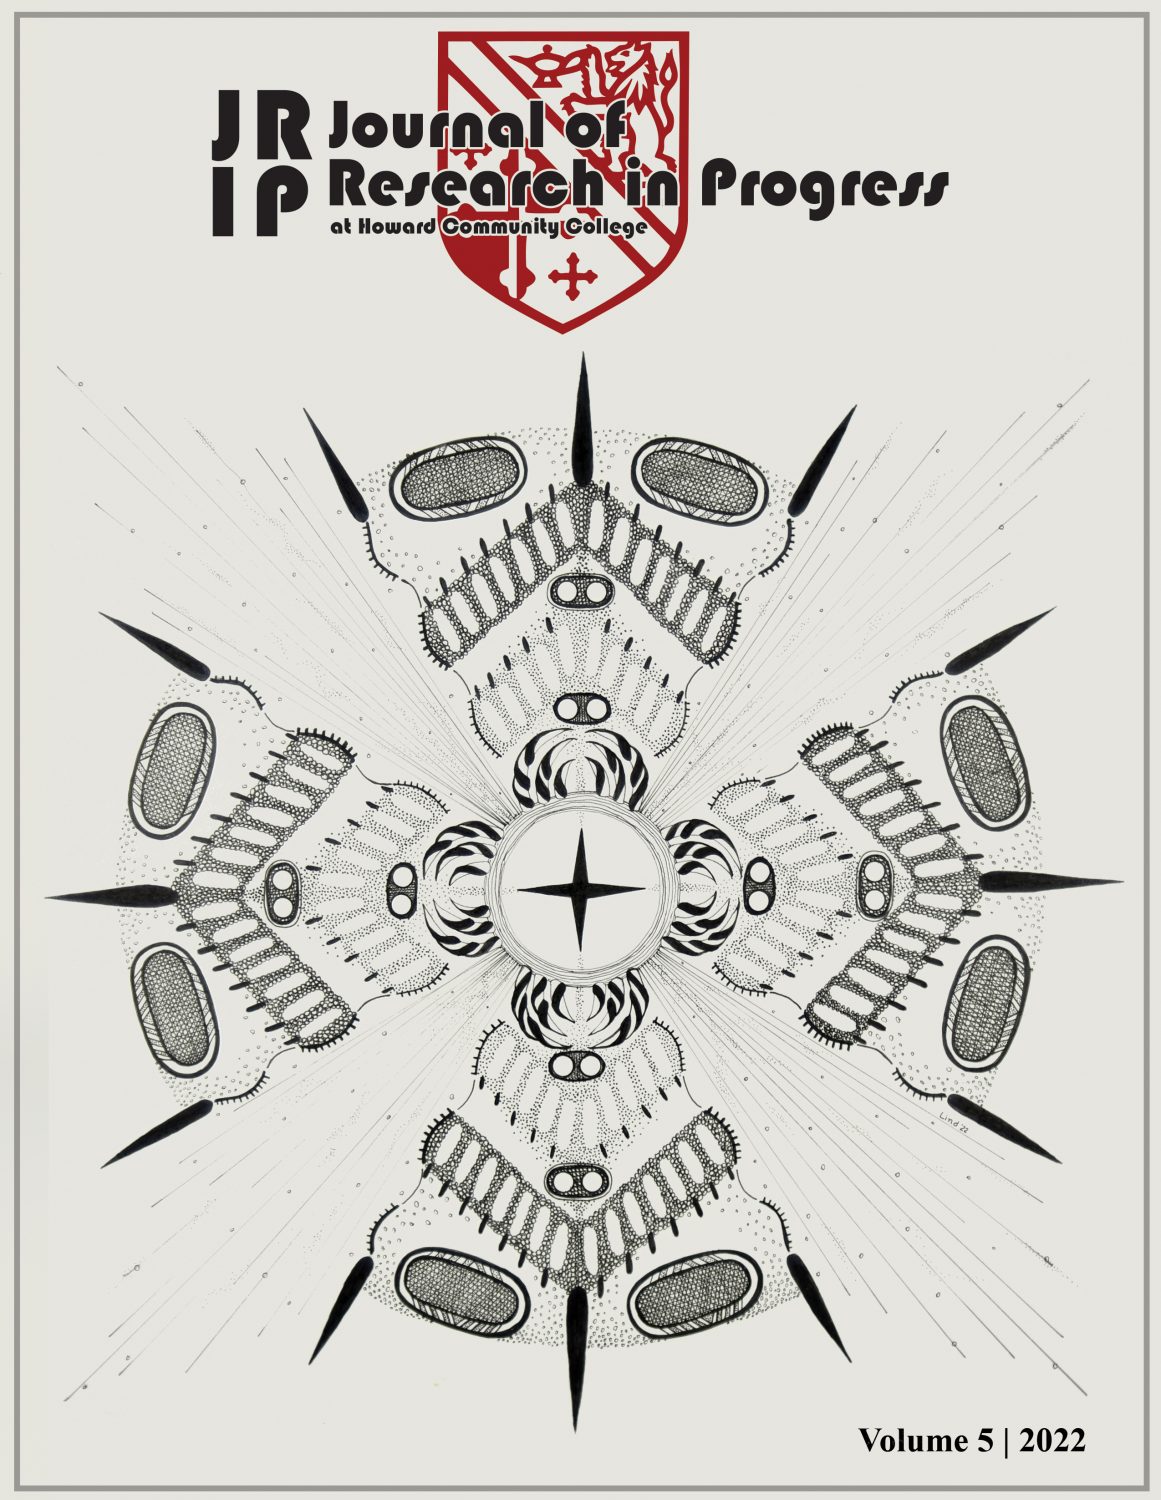 Cover image for Journal of Research in Progress Vol. 5